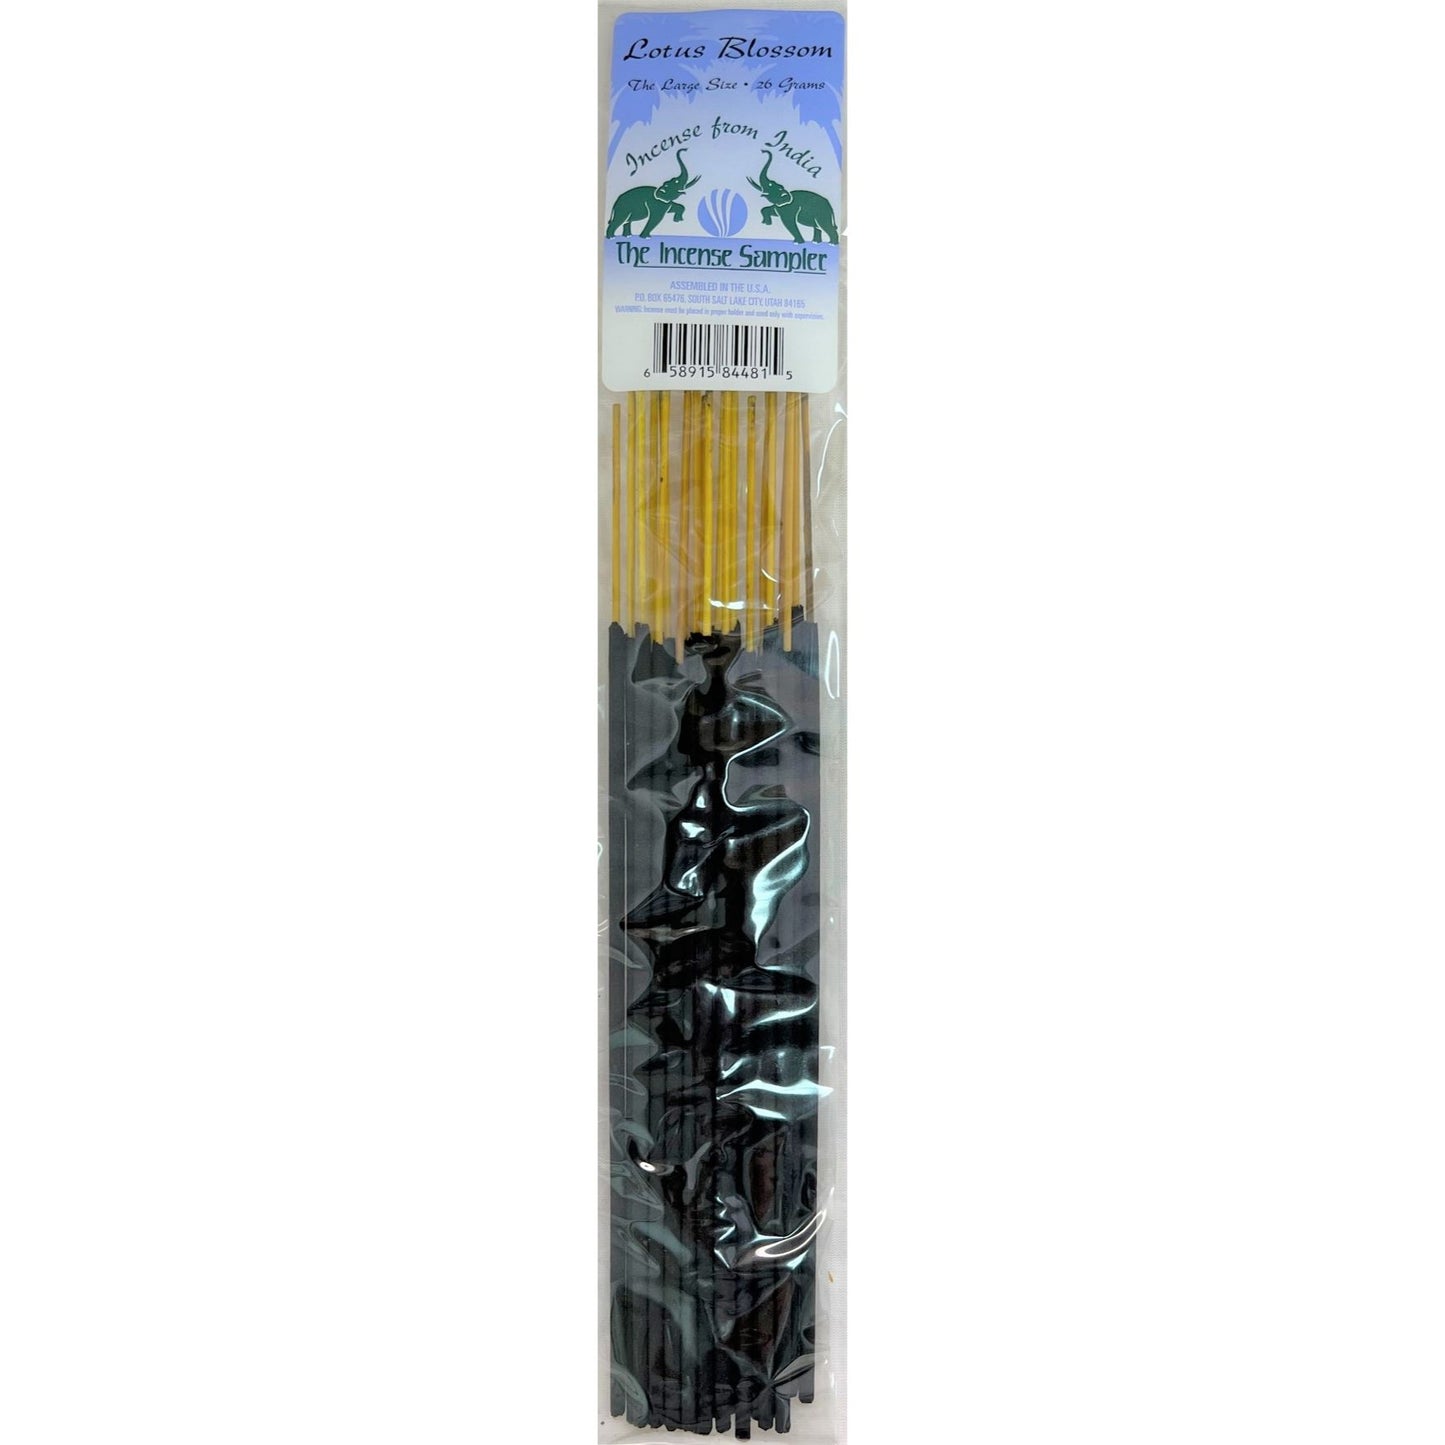 Incense From india - +Lotus Blossom